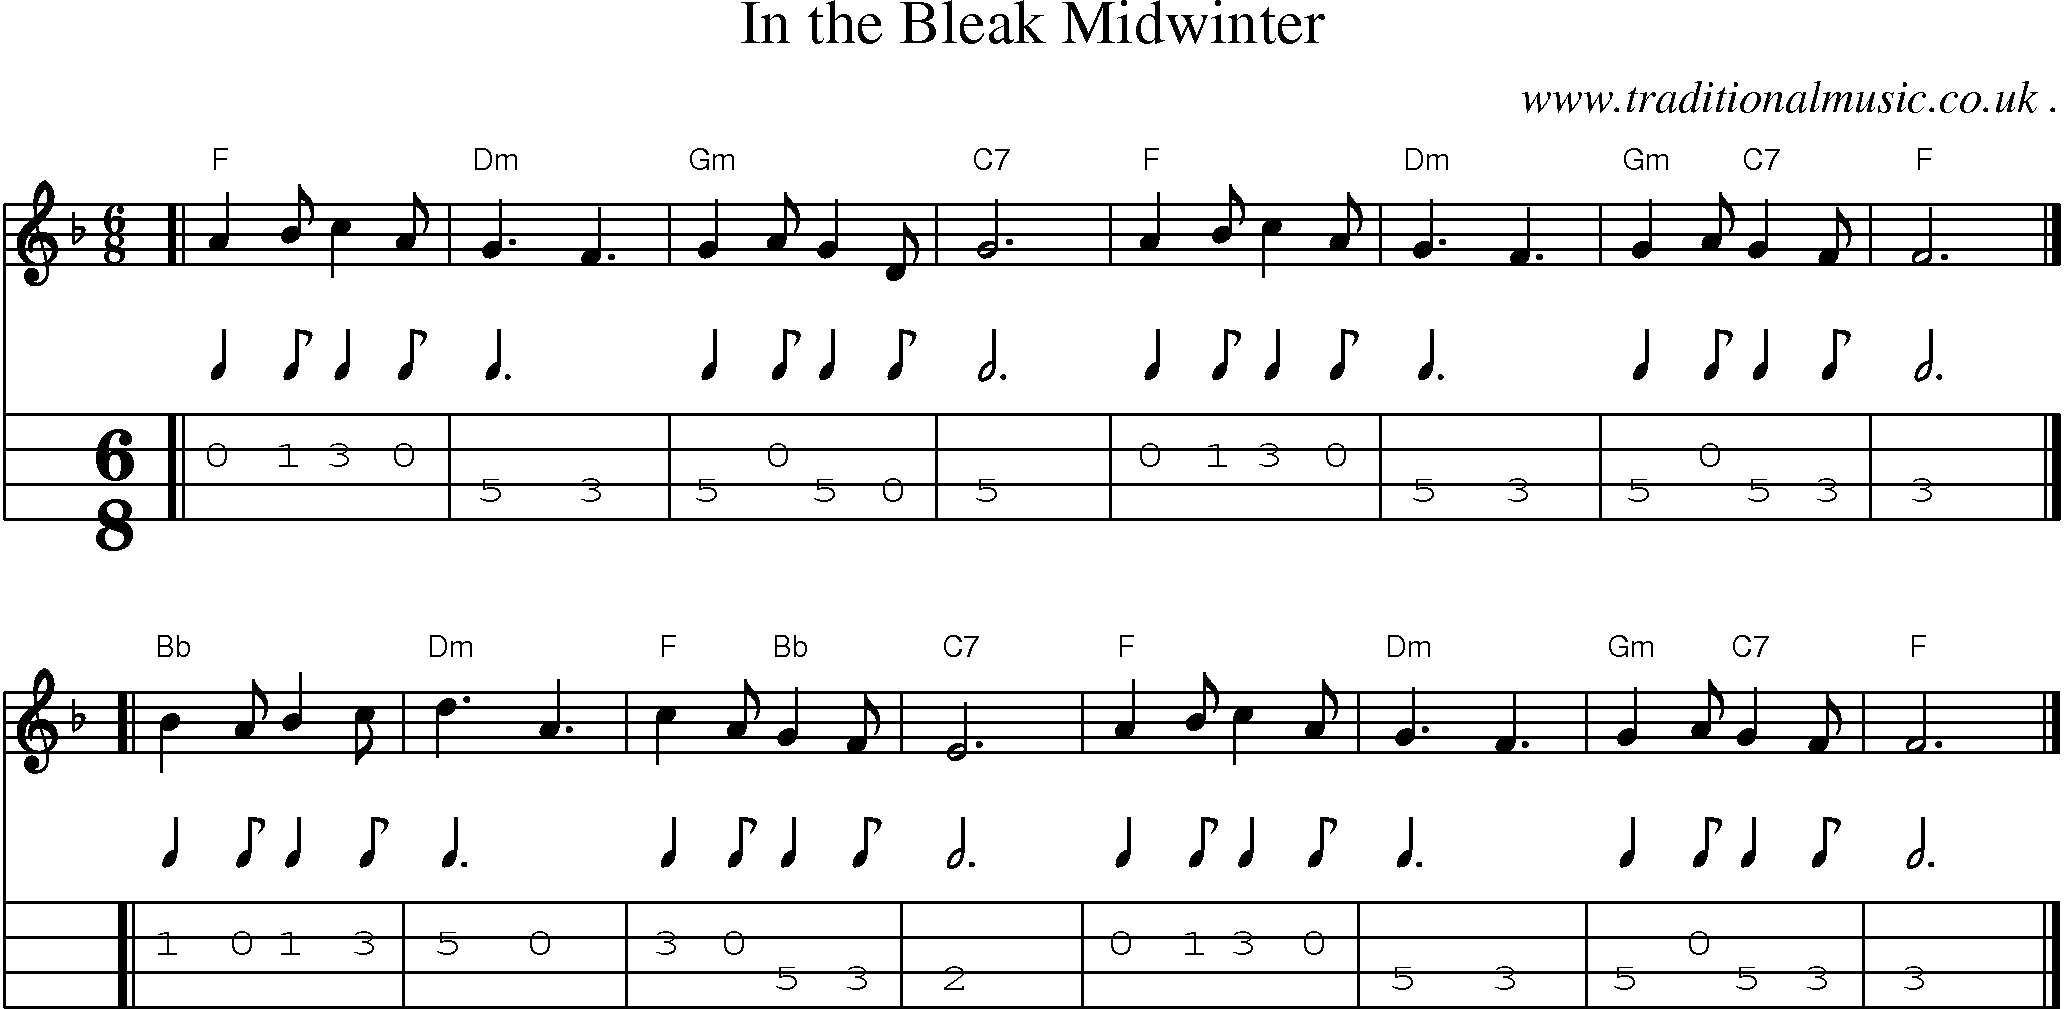 Sheet-music  score, Chords and Mandolin Tabs for In The Bleak Midwinter